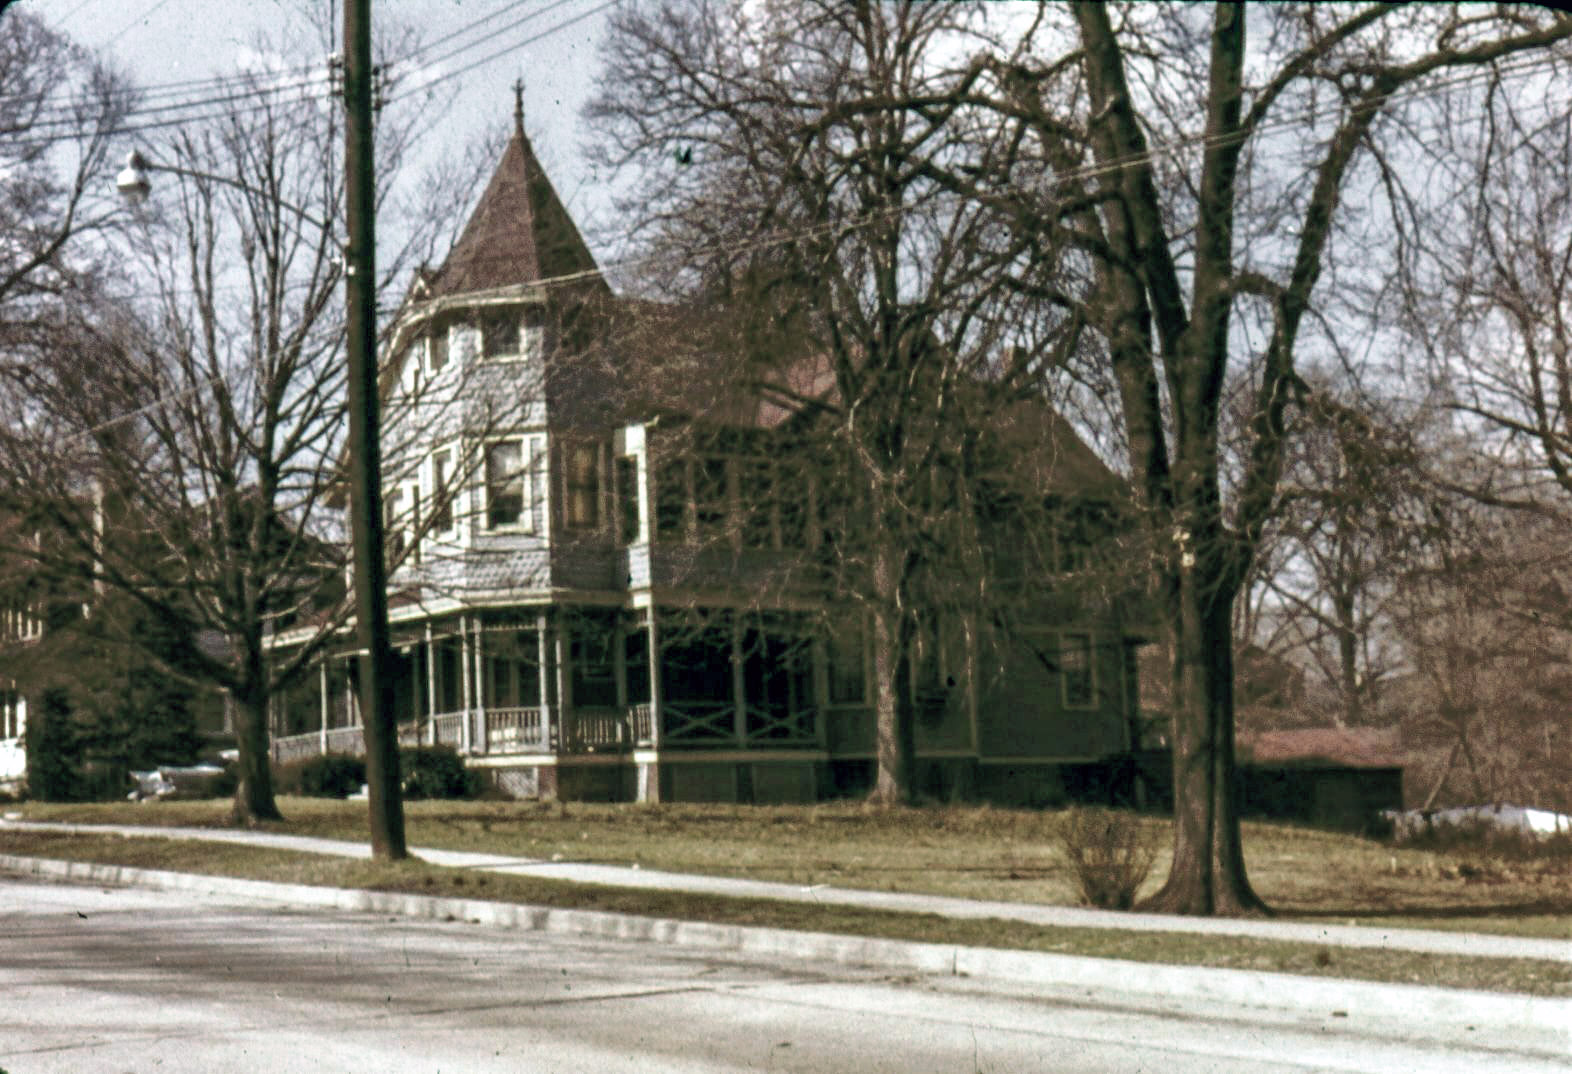 The Douglas family home at 6833 Eastern Avenue in Takoma Park, Maryland, circa 1960. Color slide by Shorpy member Steve King's dad, whose mother, Helen Douglas King, lived there when she was a little girl. View full size.